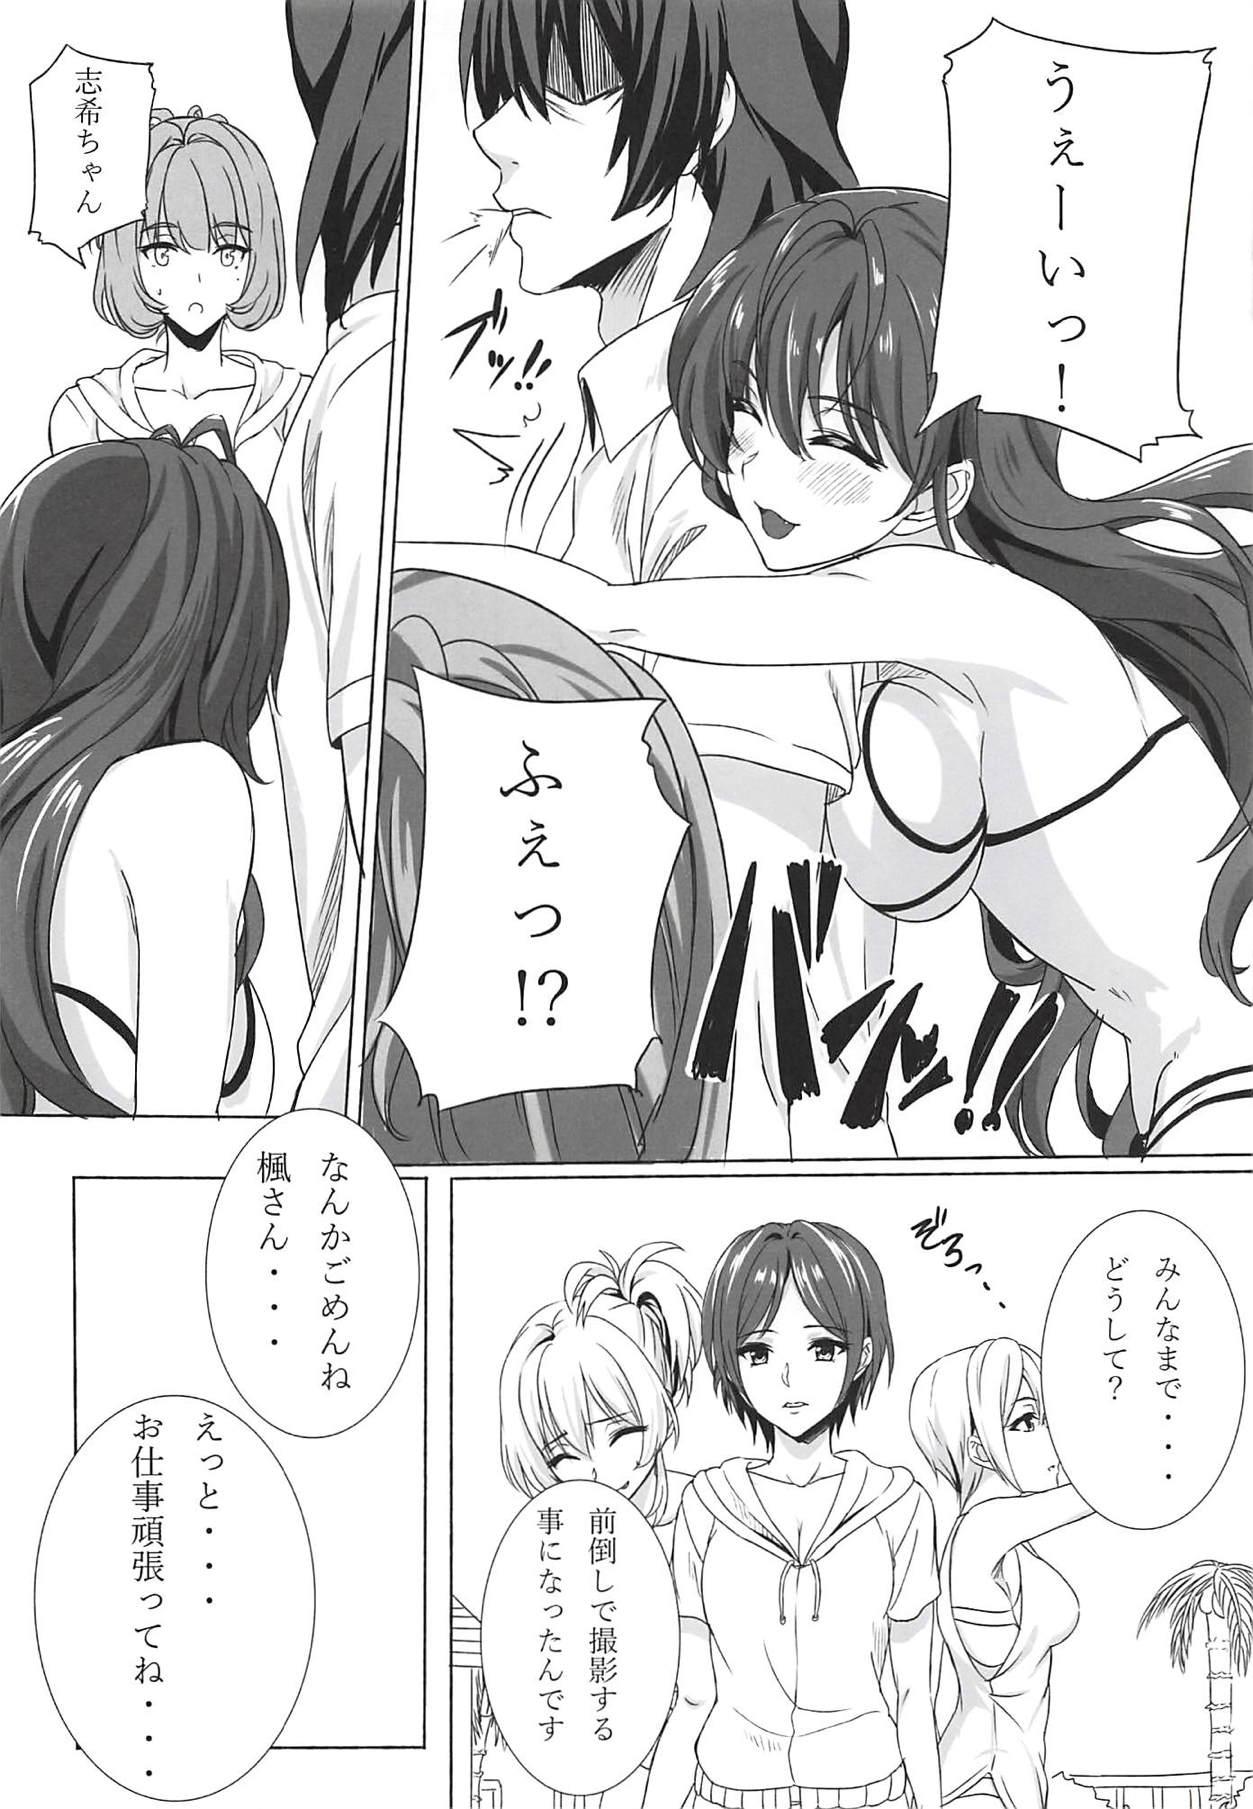 Small Tits Koikaze Project IV - The idolmaster Chile - Page 5